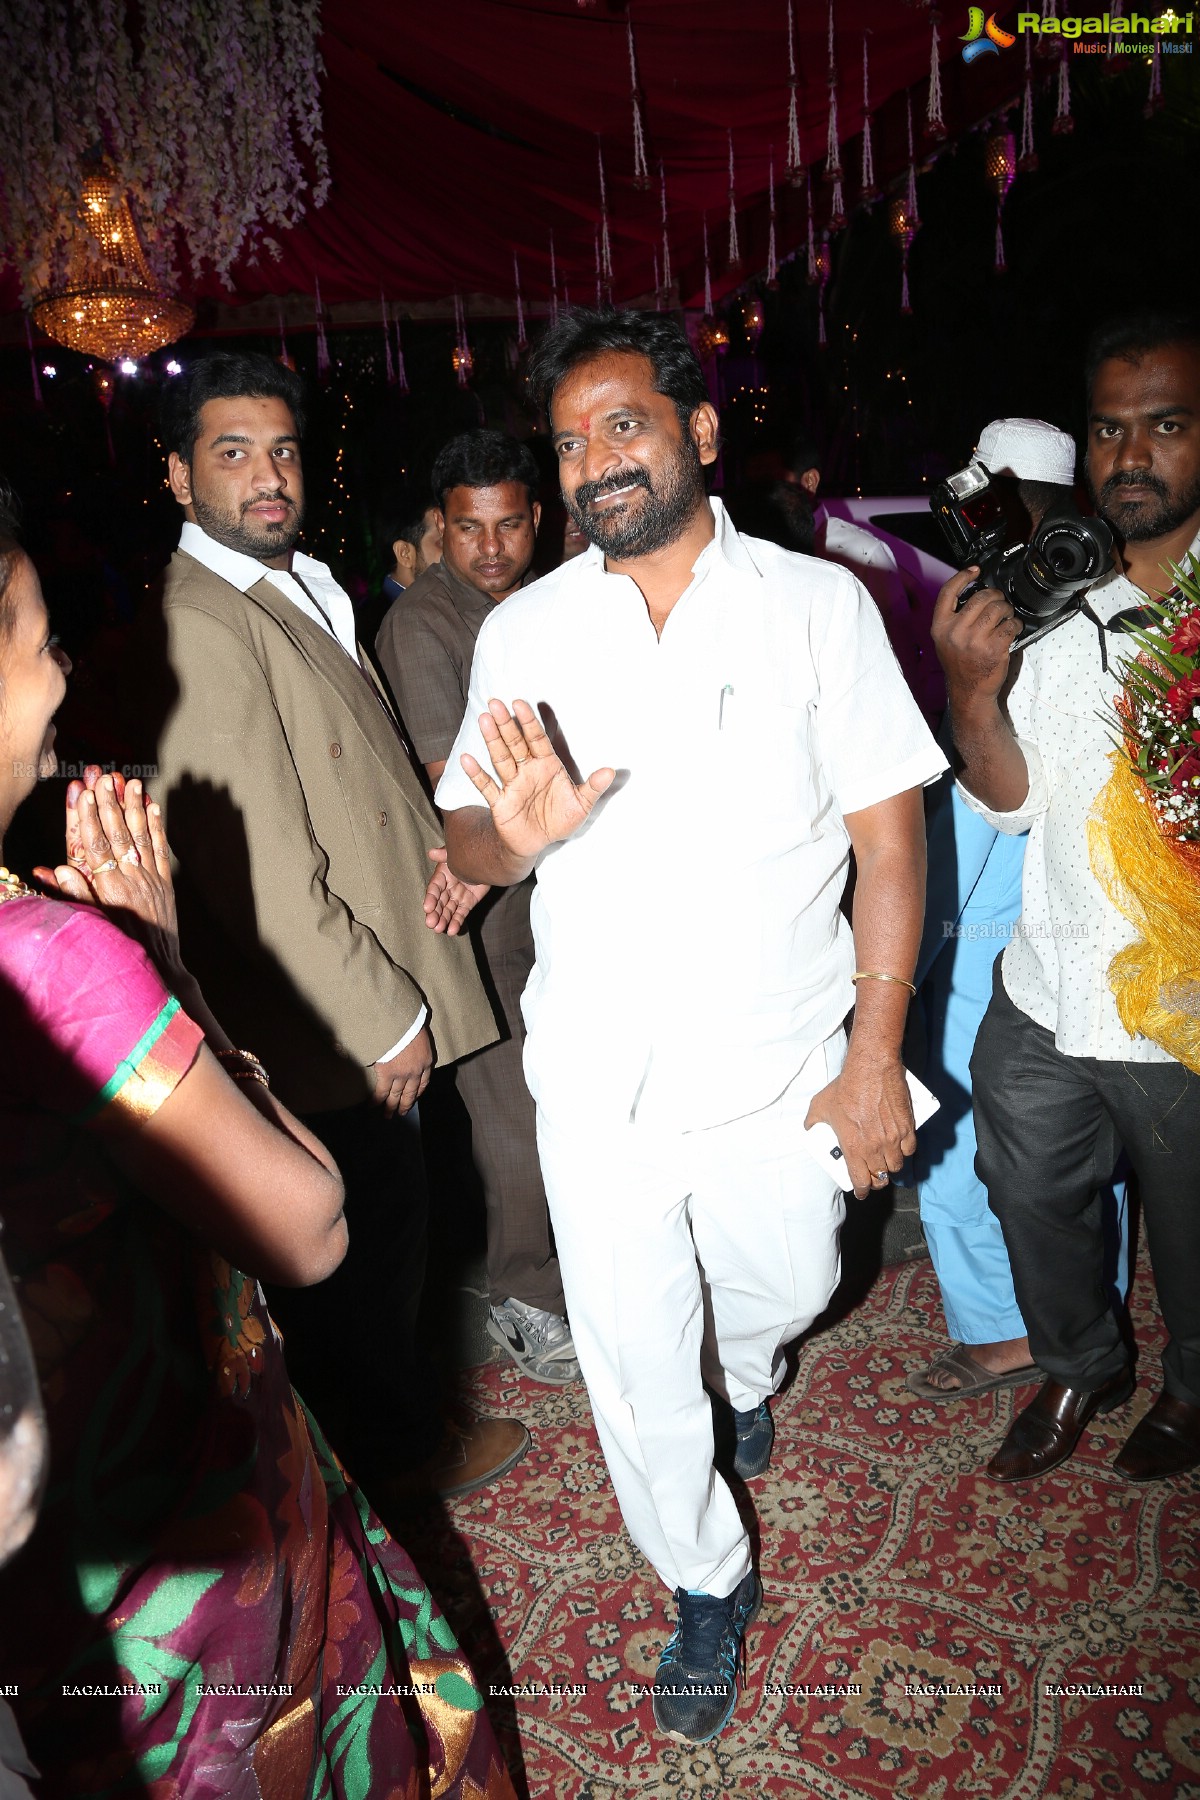 Syed Ismail Ali's Daughter Wedding Reception at SS Convention, Shamshabad